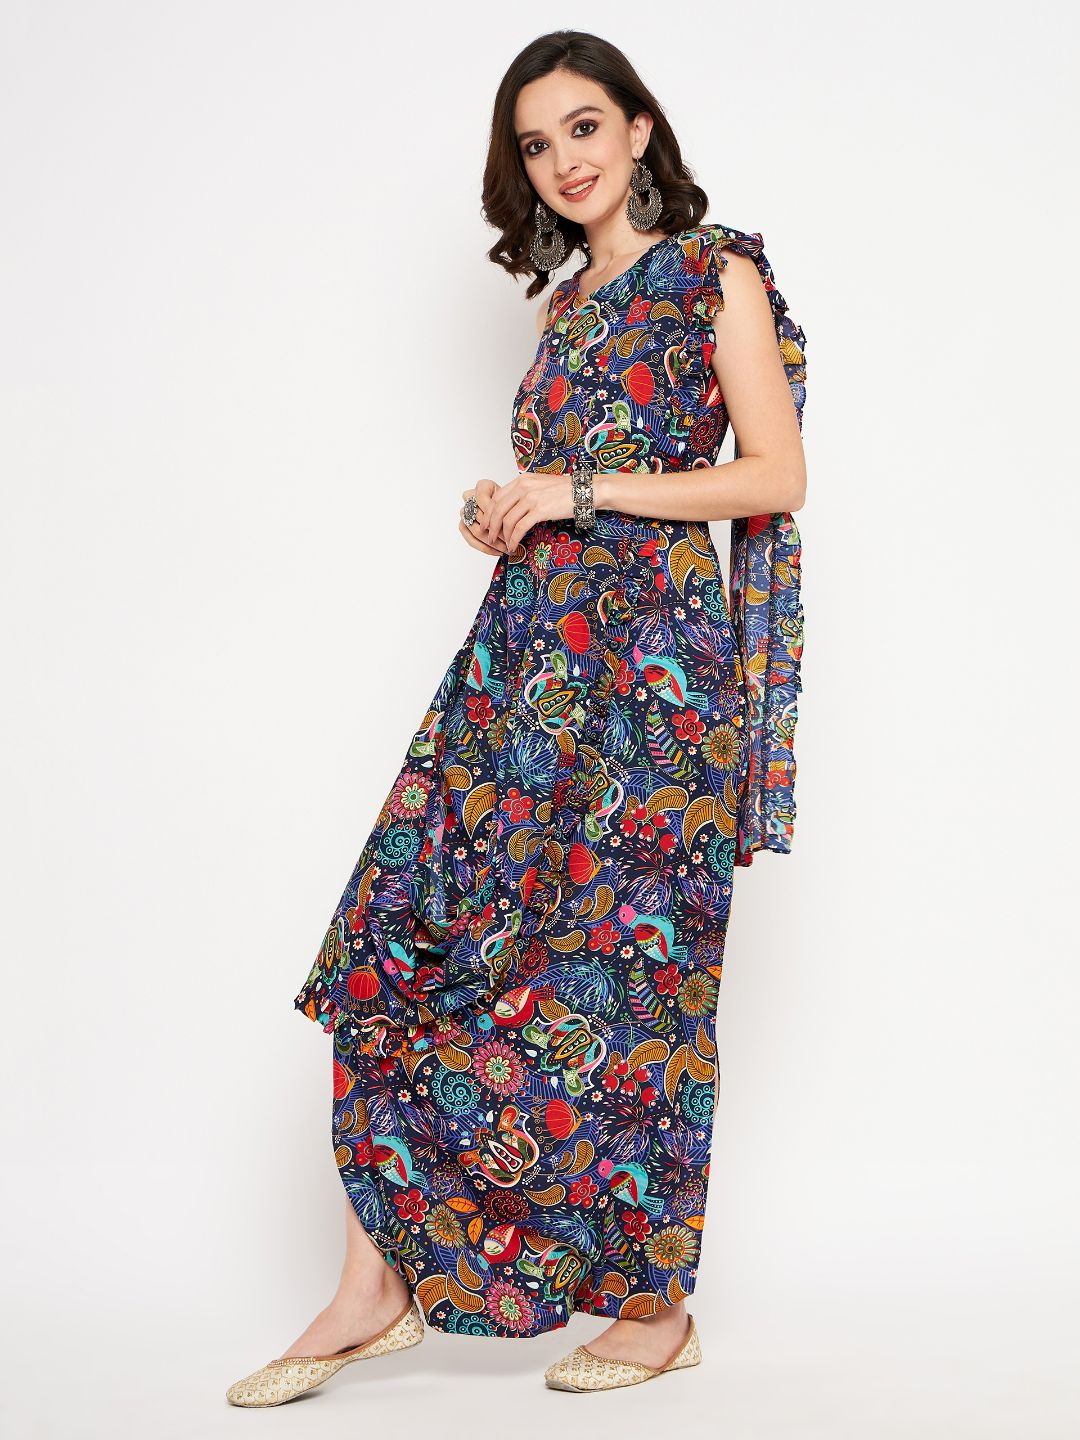 Aggregate more than 224 jumpsuit with attached dupatta best